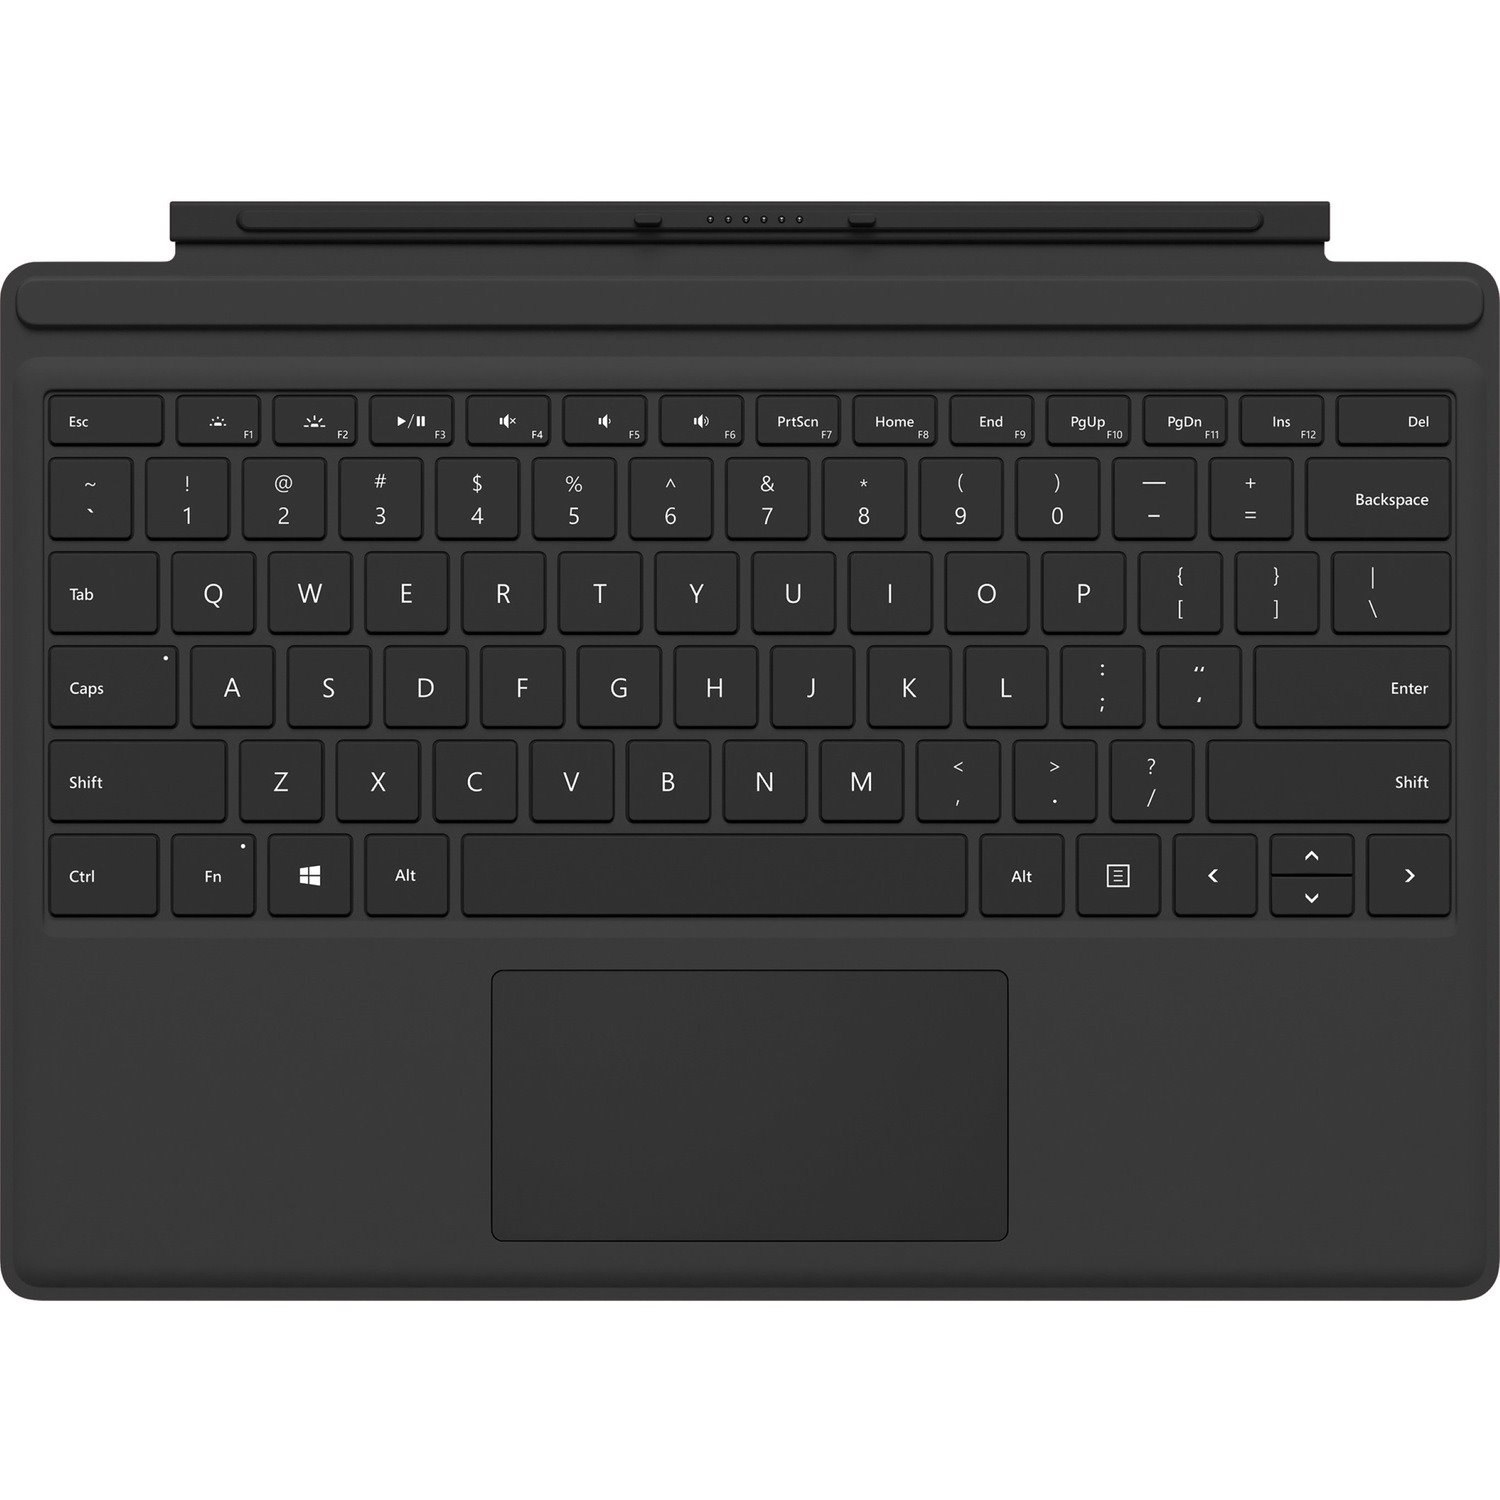 Microsoft Type Cover Keyboard/Cover Case Microsoft Surface Pro 3, Surface Pro 4, Surface Pro (5th Gen), Surface Pro 6, Surface Pro 7, Surface Pro Tablet - Black